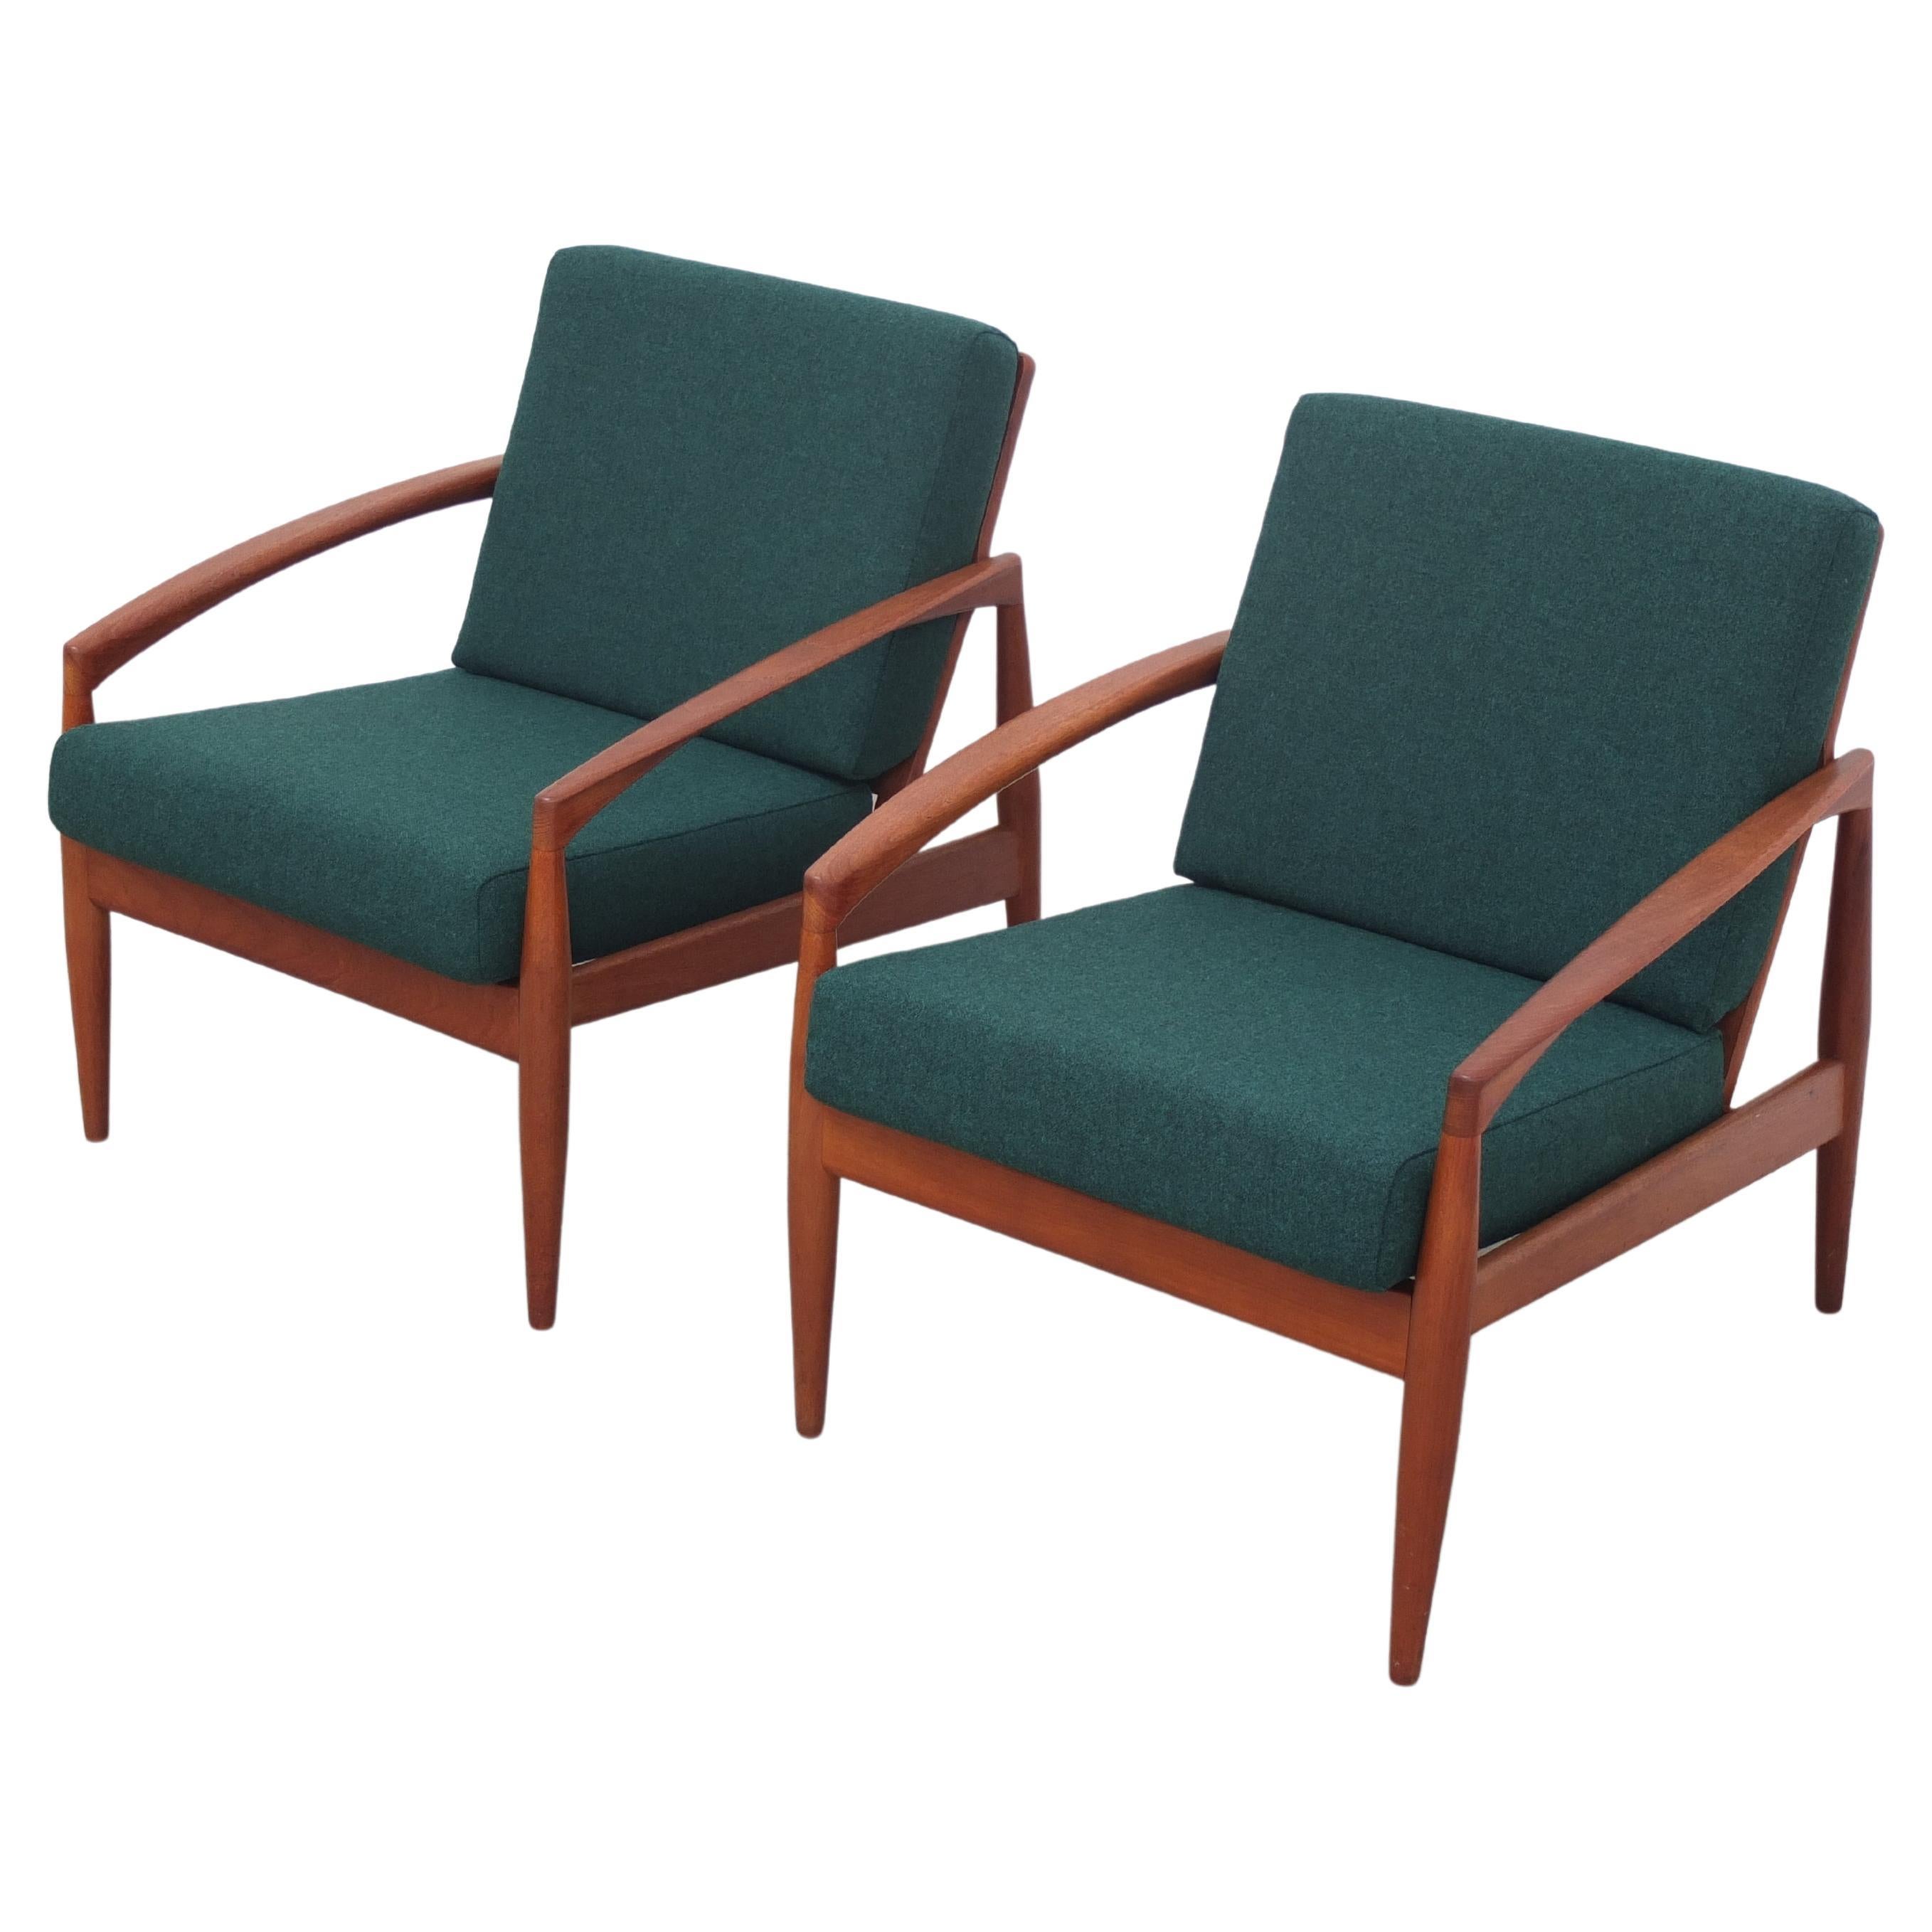 Pair of 'Paper Knife' Easy Chairs by Kai Kristiansen for Magnus Olesen, 1956 For Sale